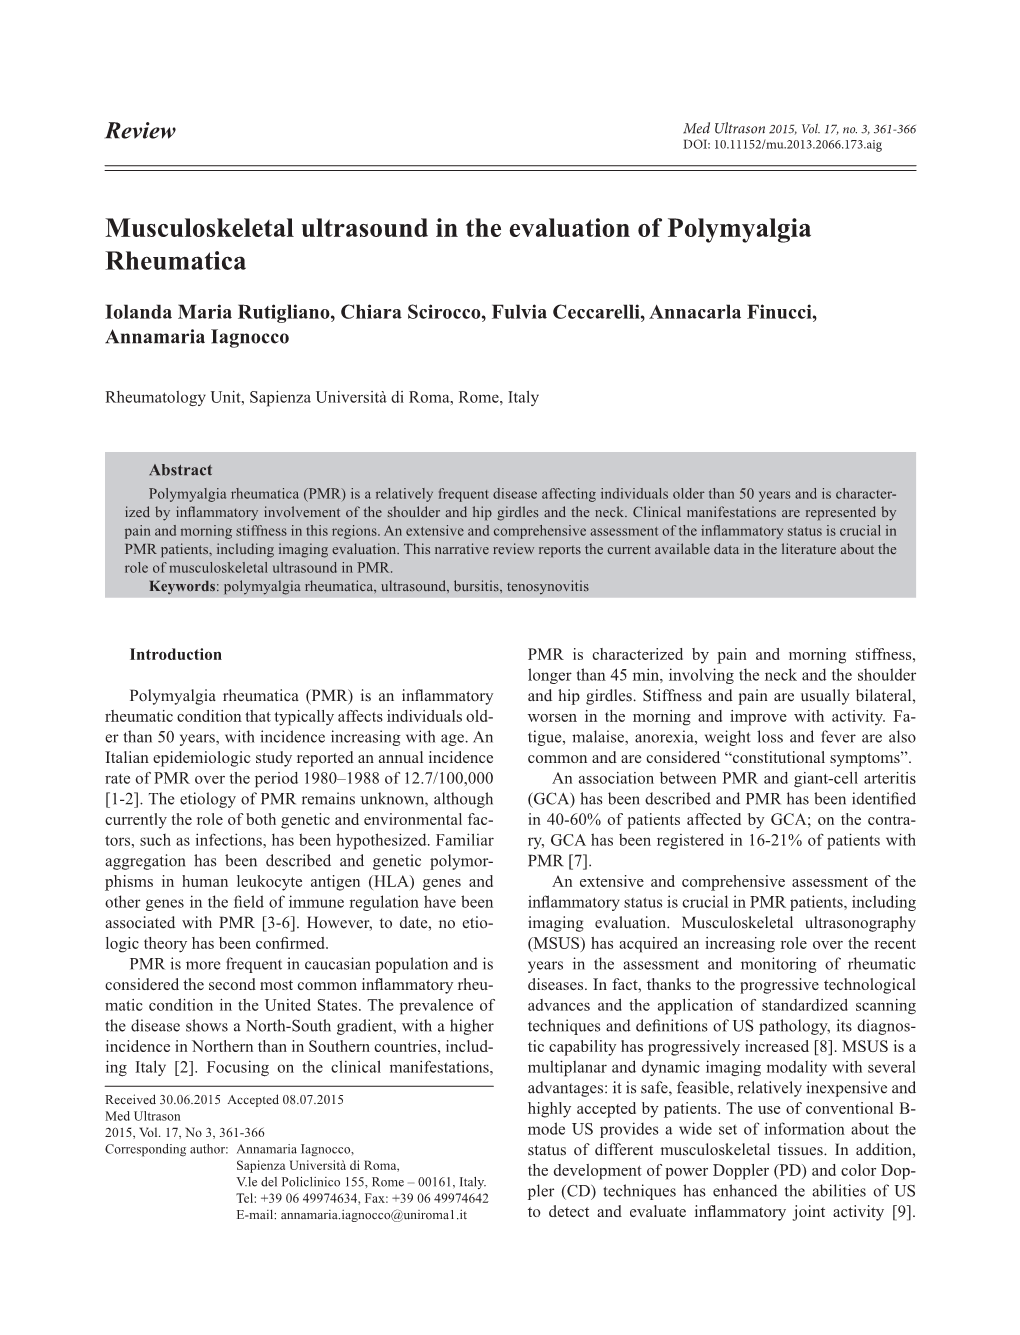 Musculoskeletal Ultrasound in the Evaluation of Polymyalgia Rheumatica